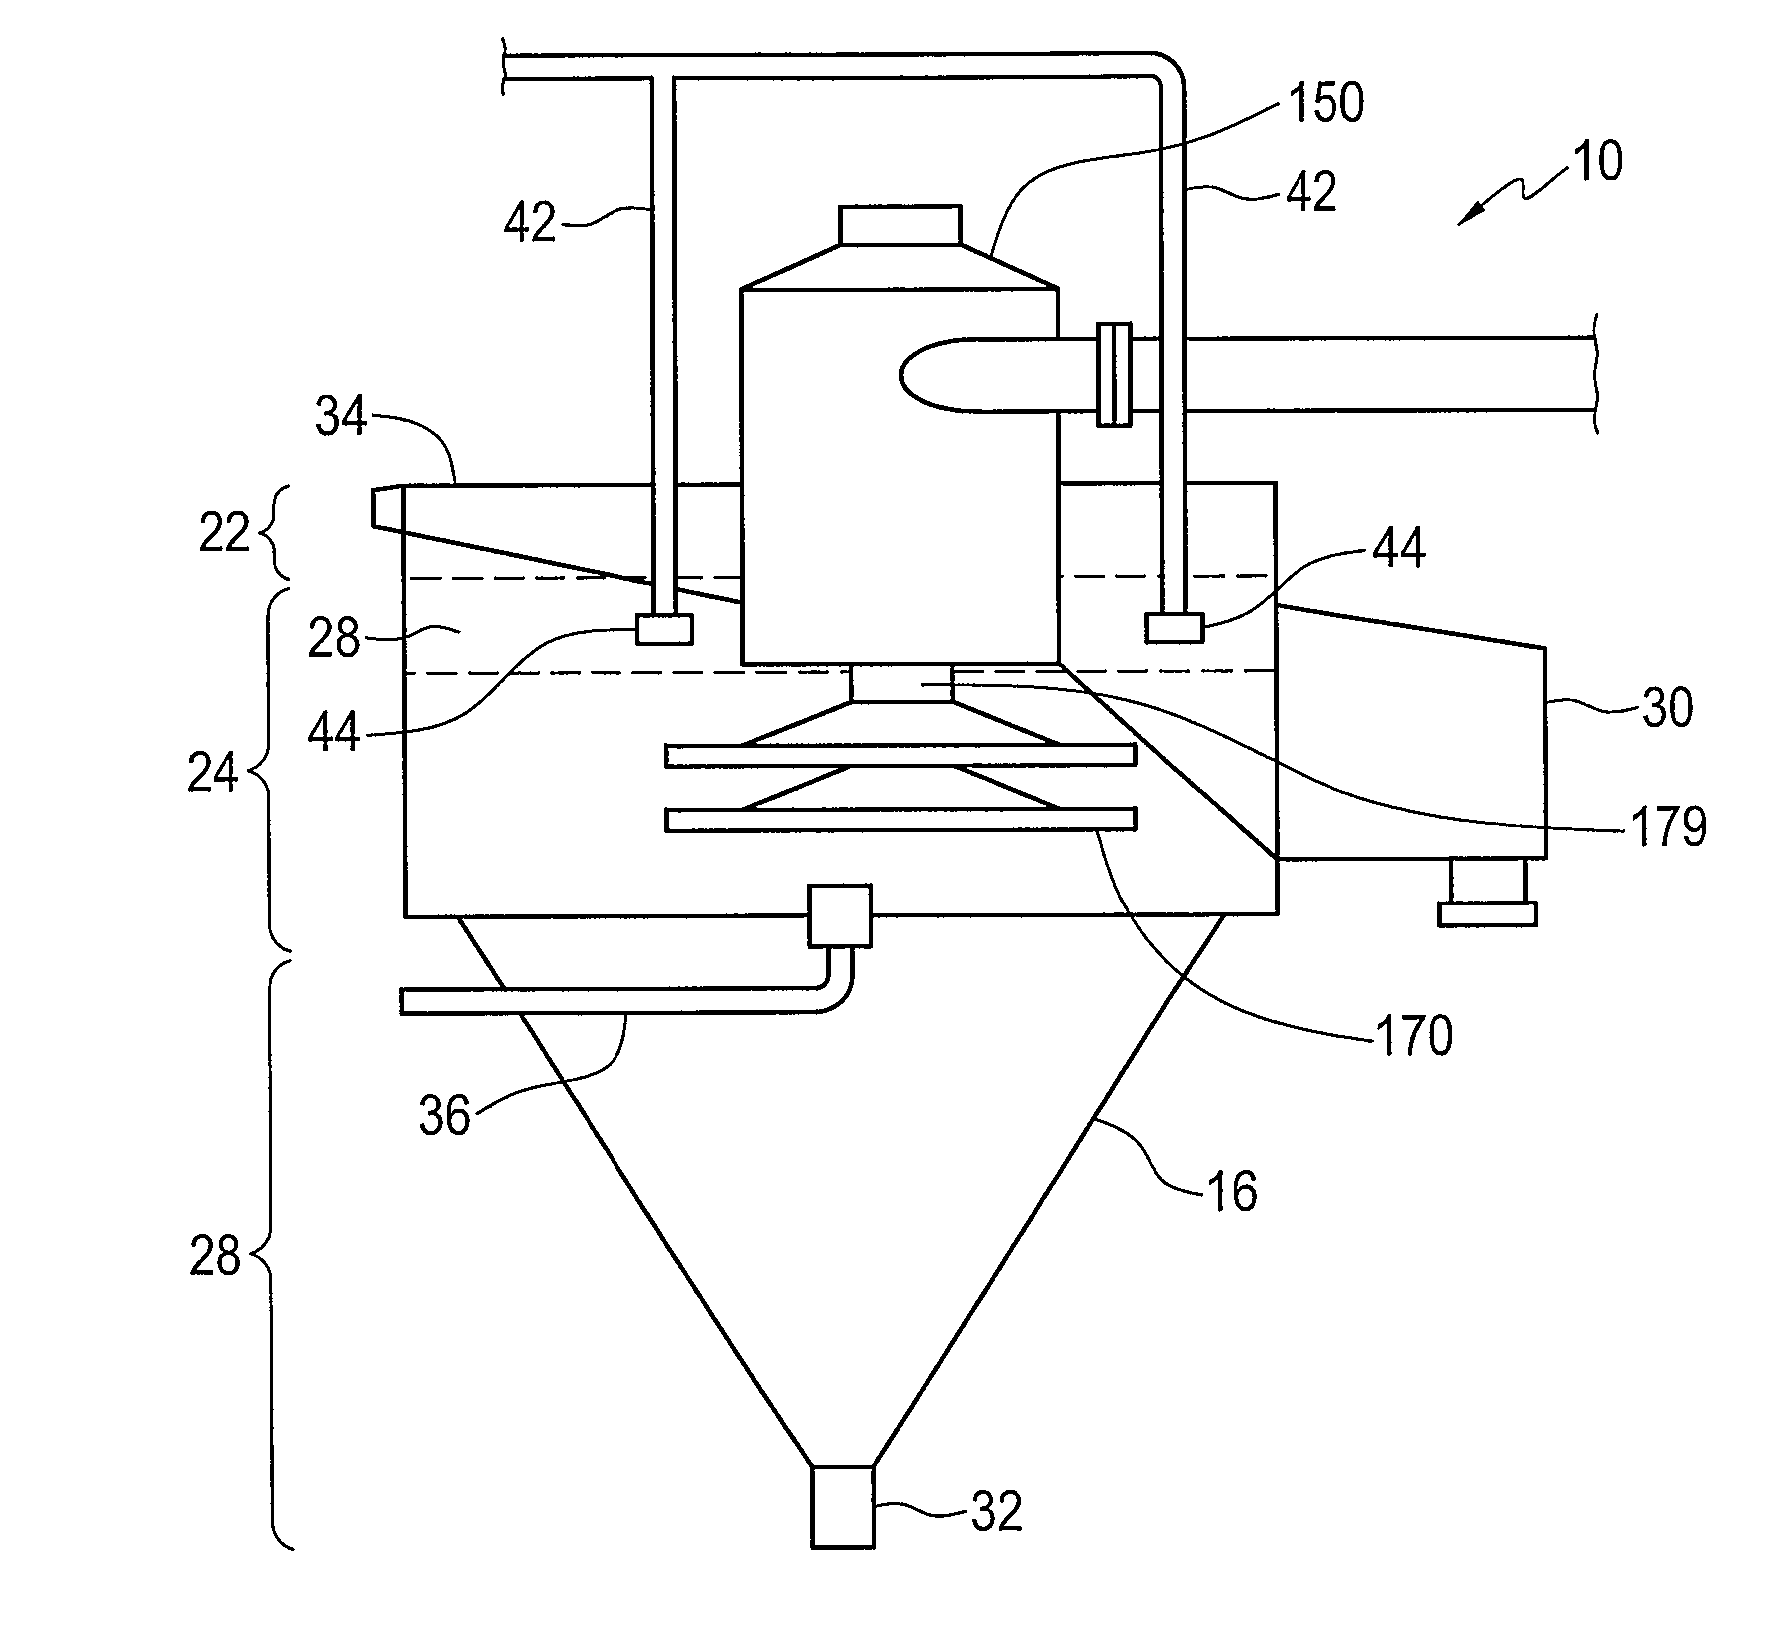 Feedwell for a gravity separation vessel